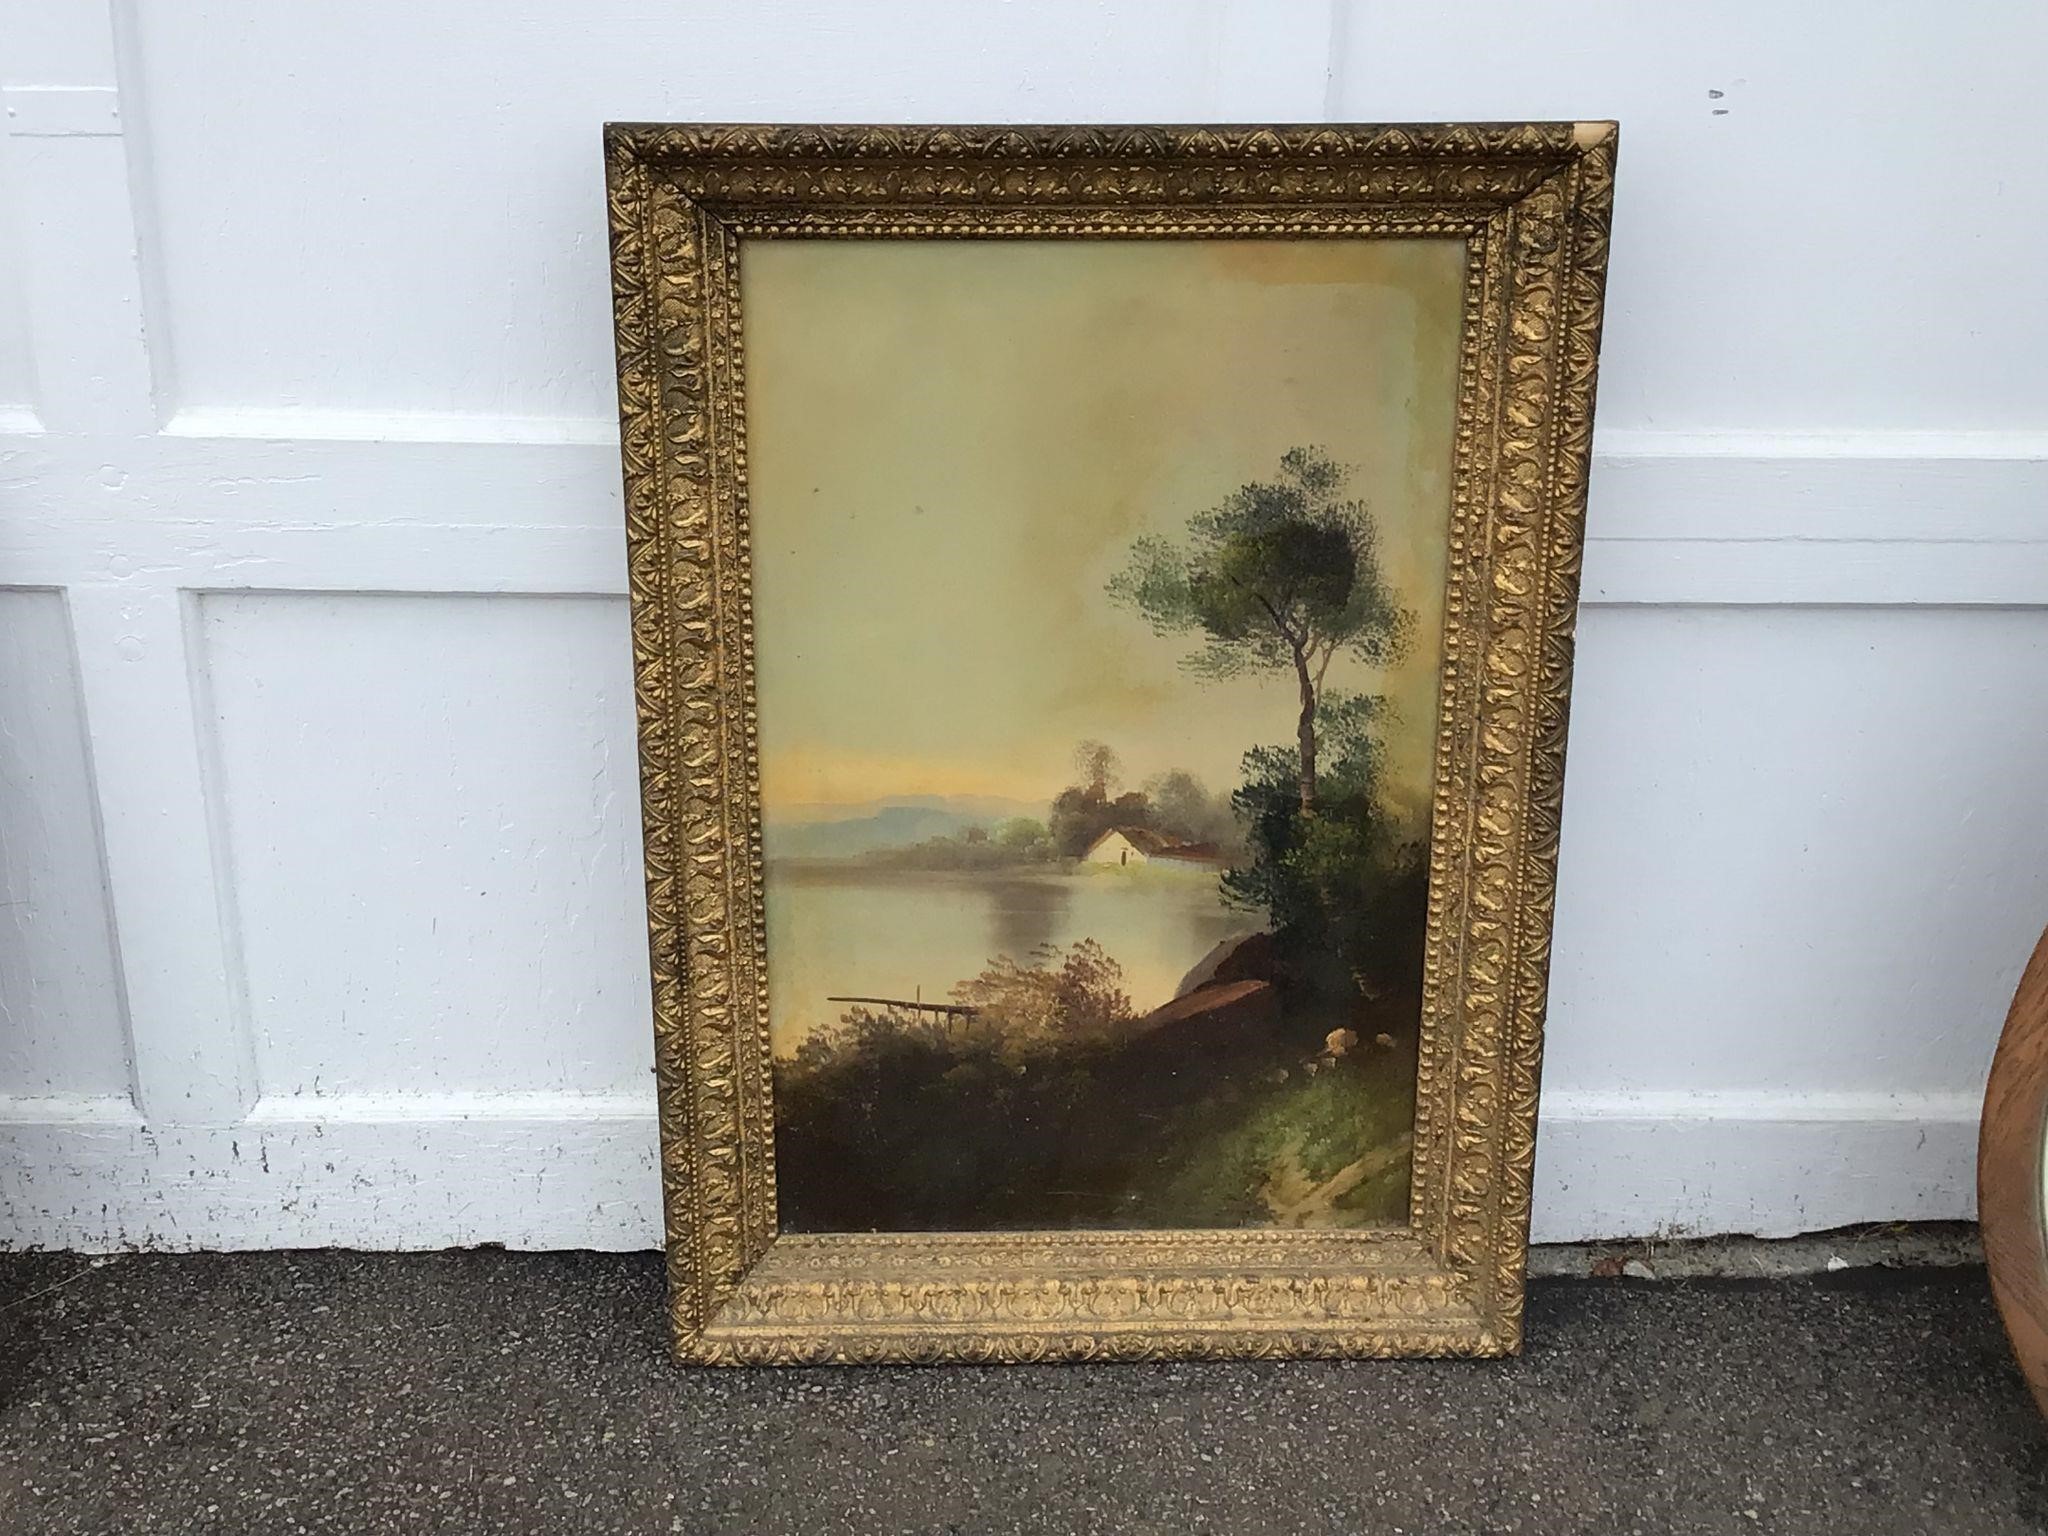 ANTIQUE OIL PAINTING - ON CANVAS - ANTIQUE FRAME